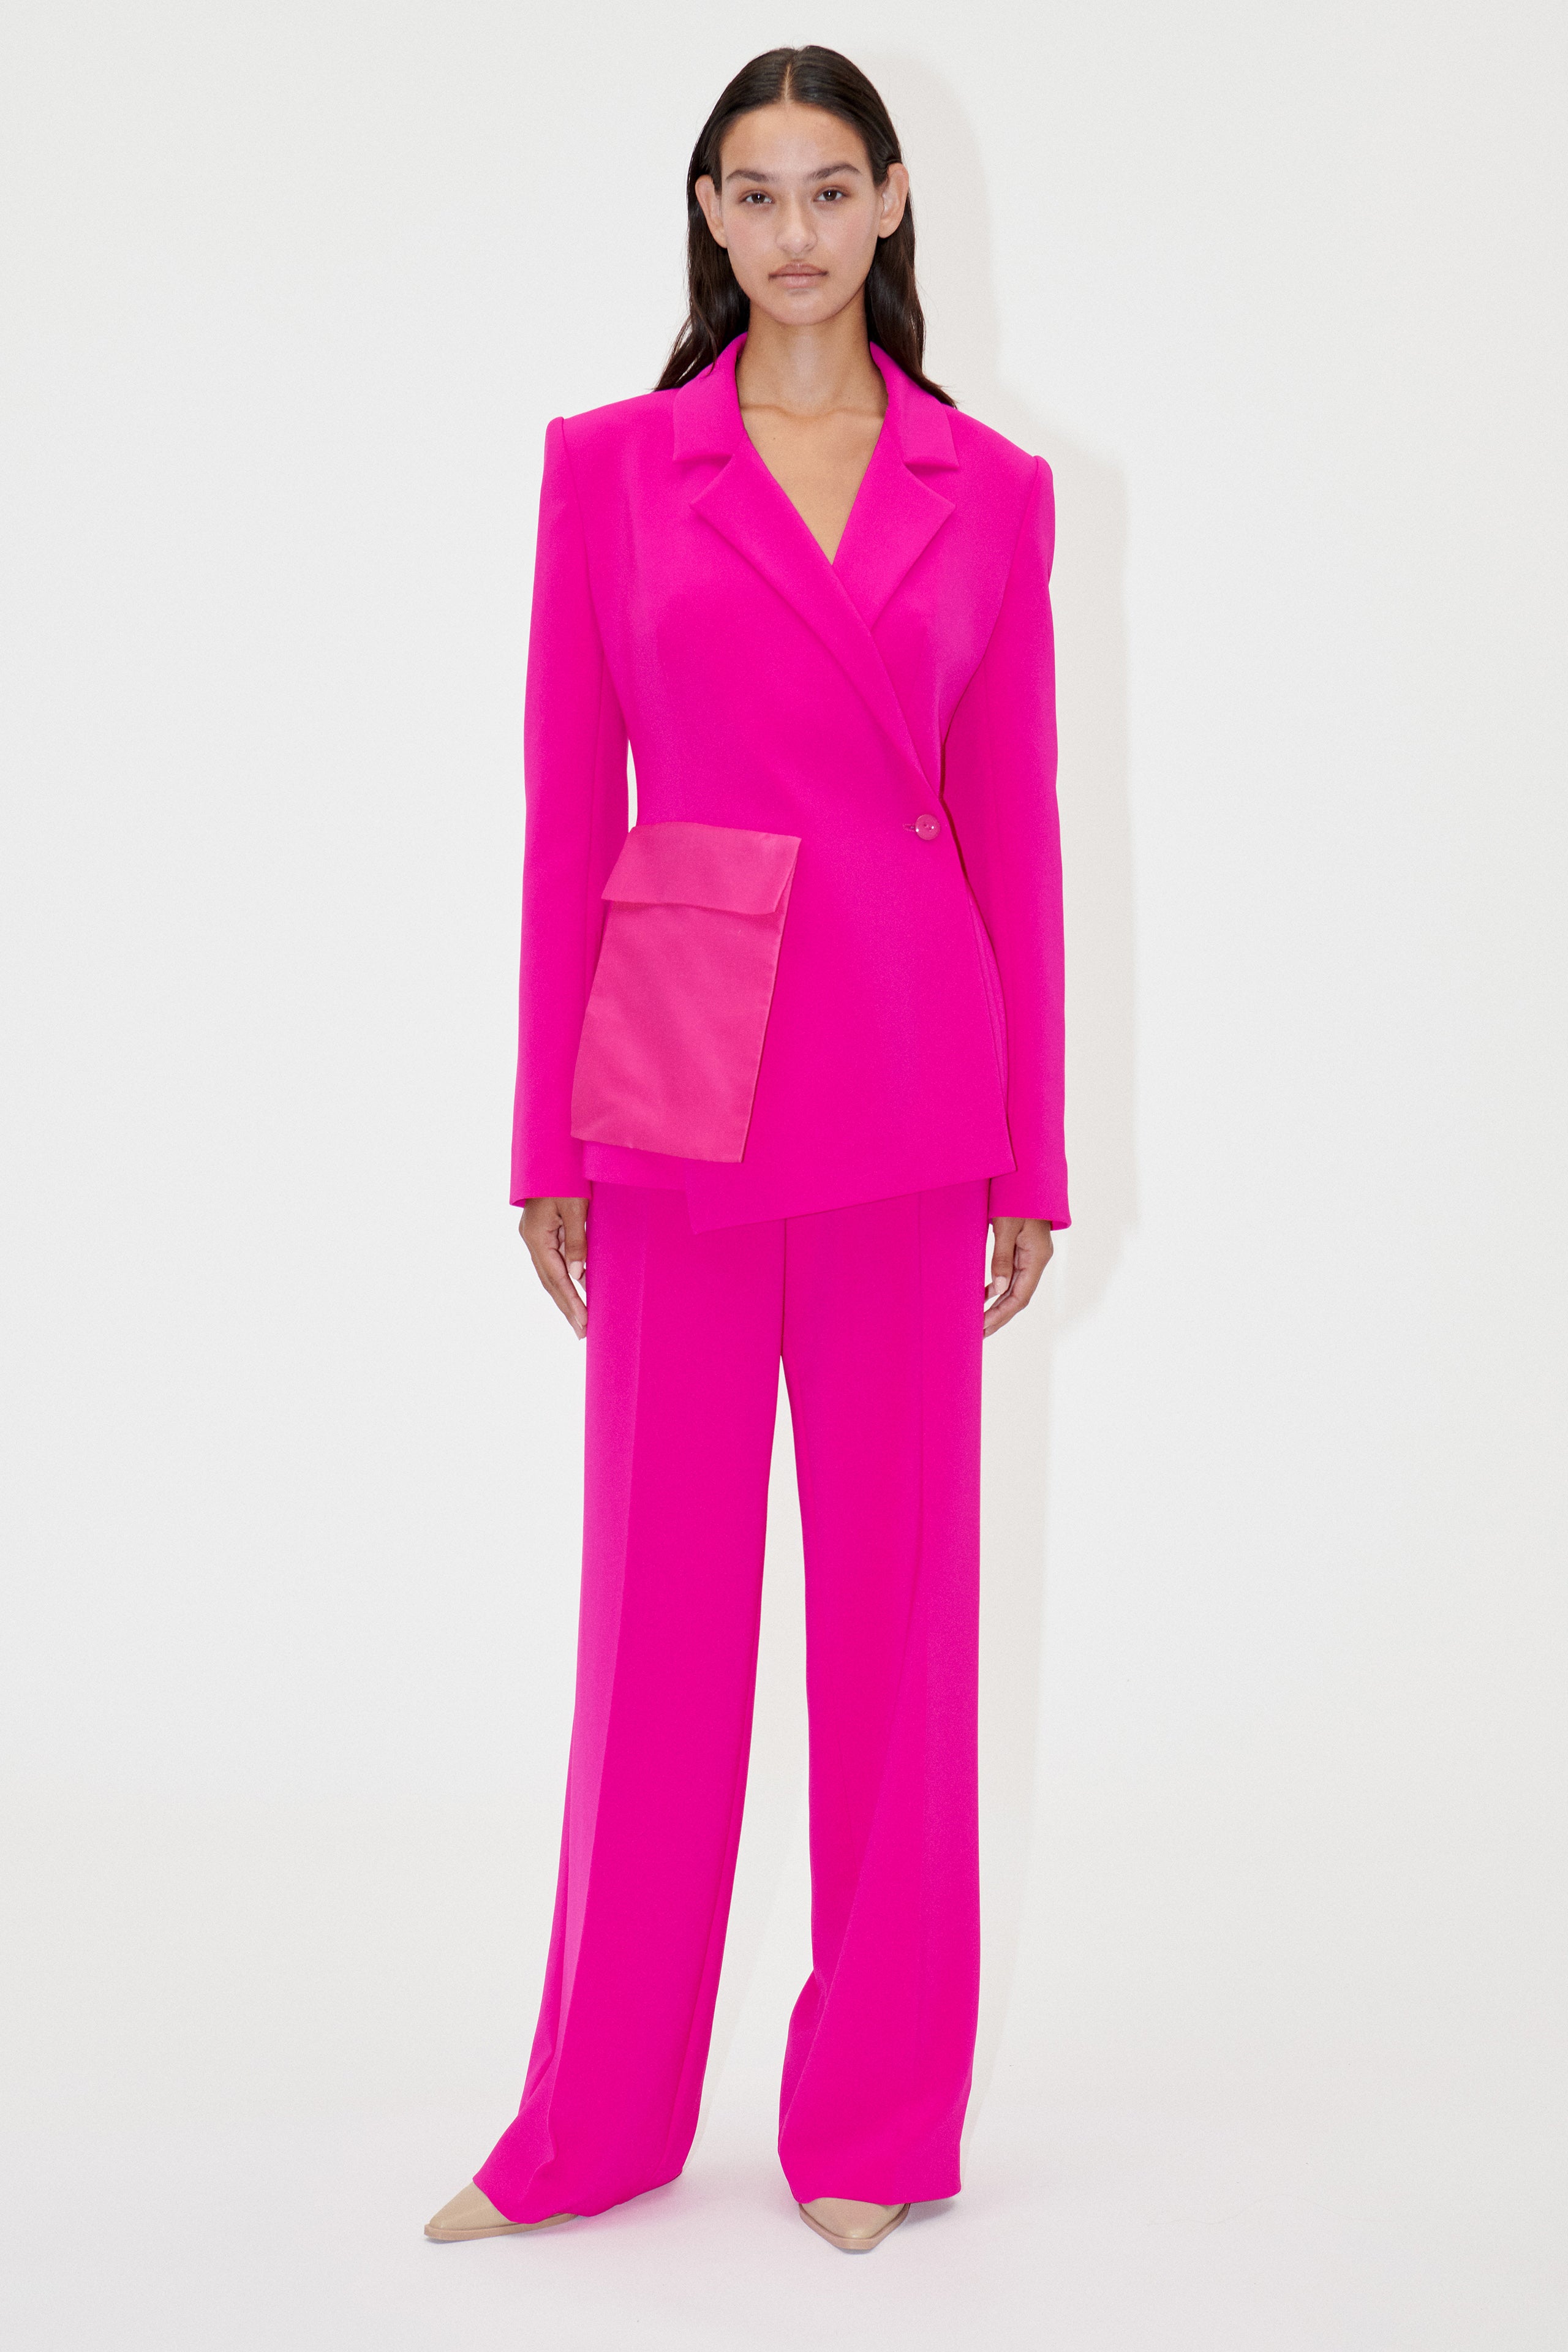 I tried on Dunnes Stores' new pink satin trouser suit with prices